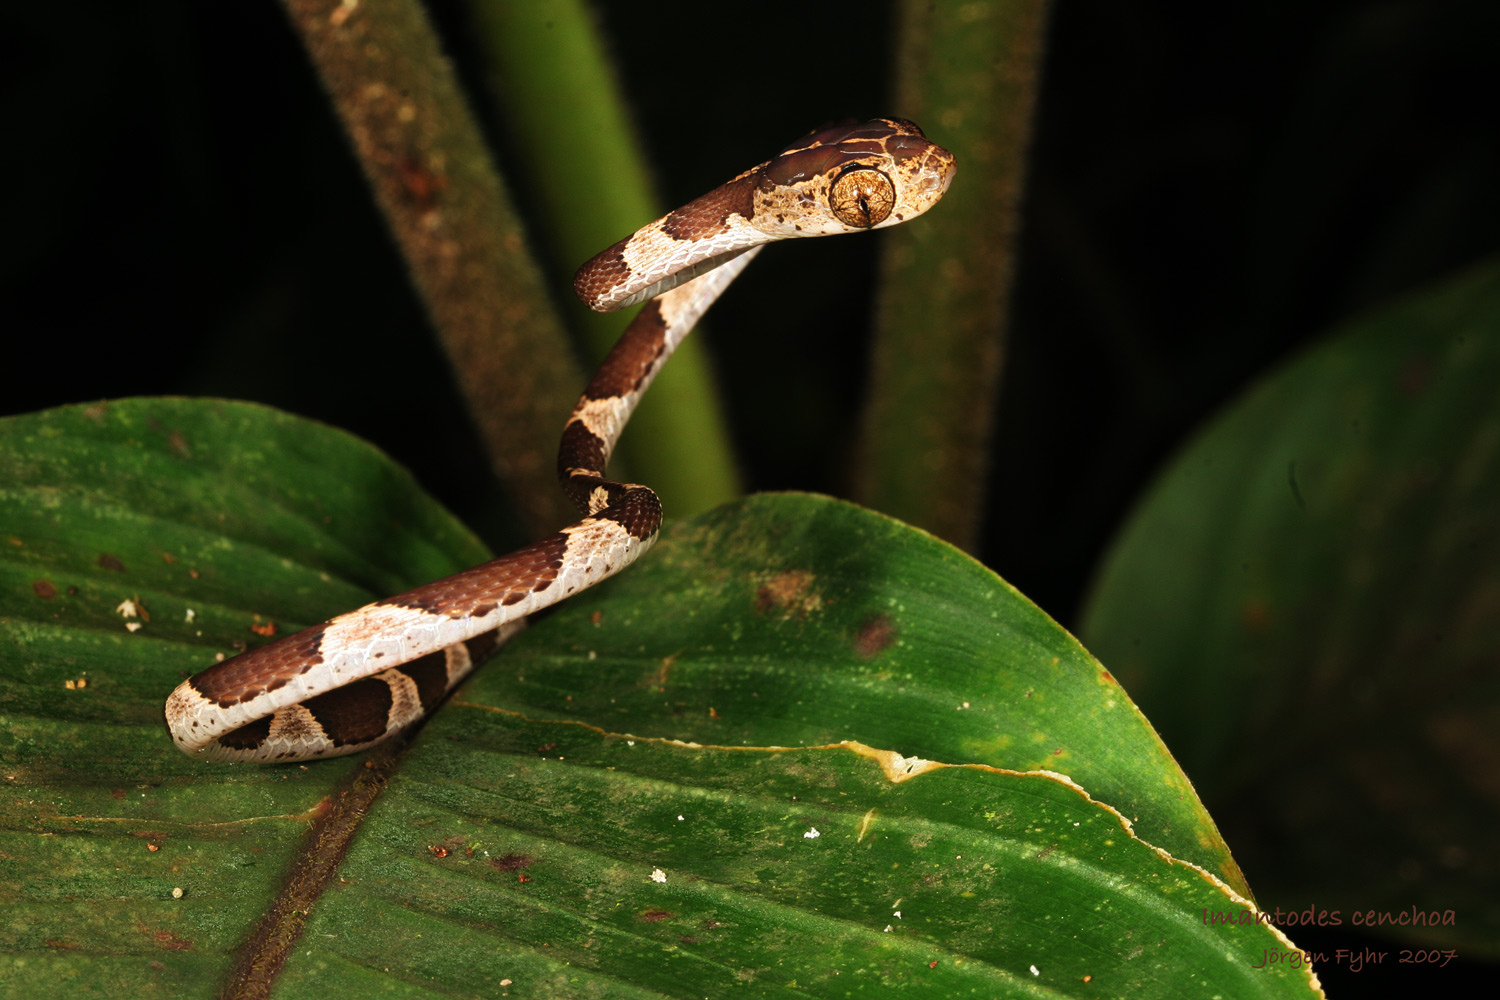 Neotropical snakes